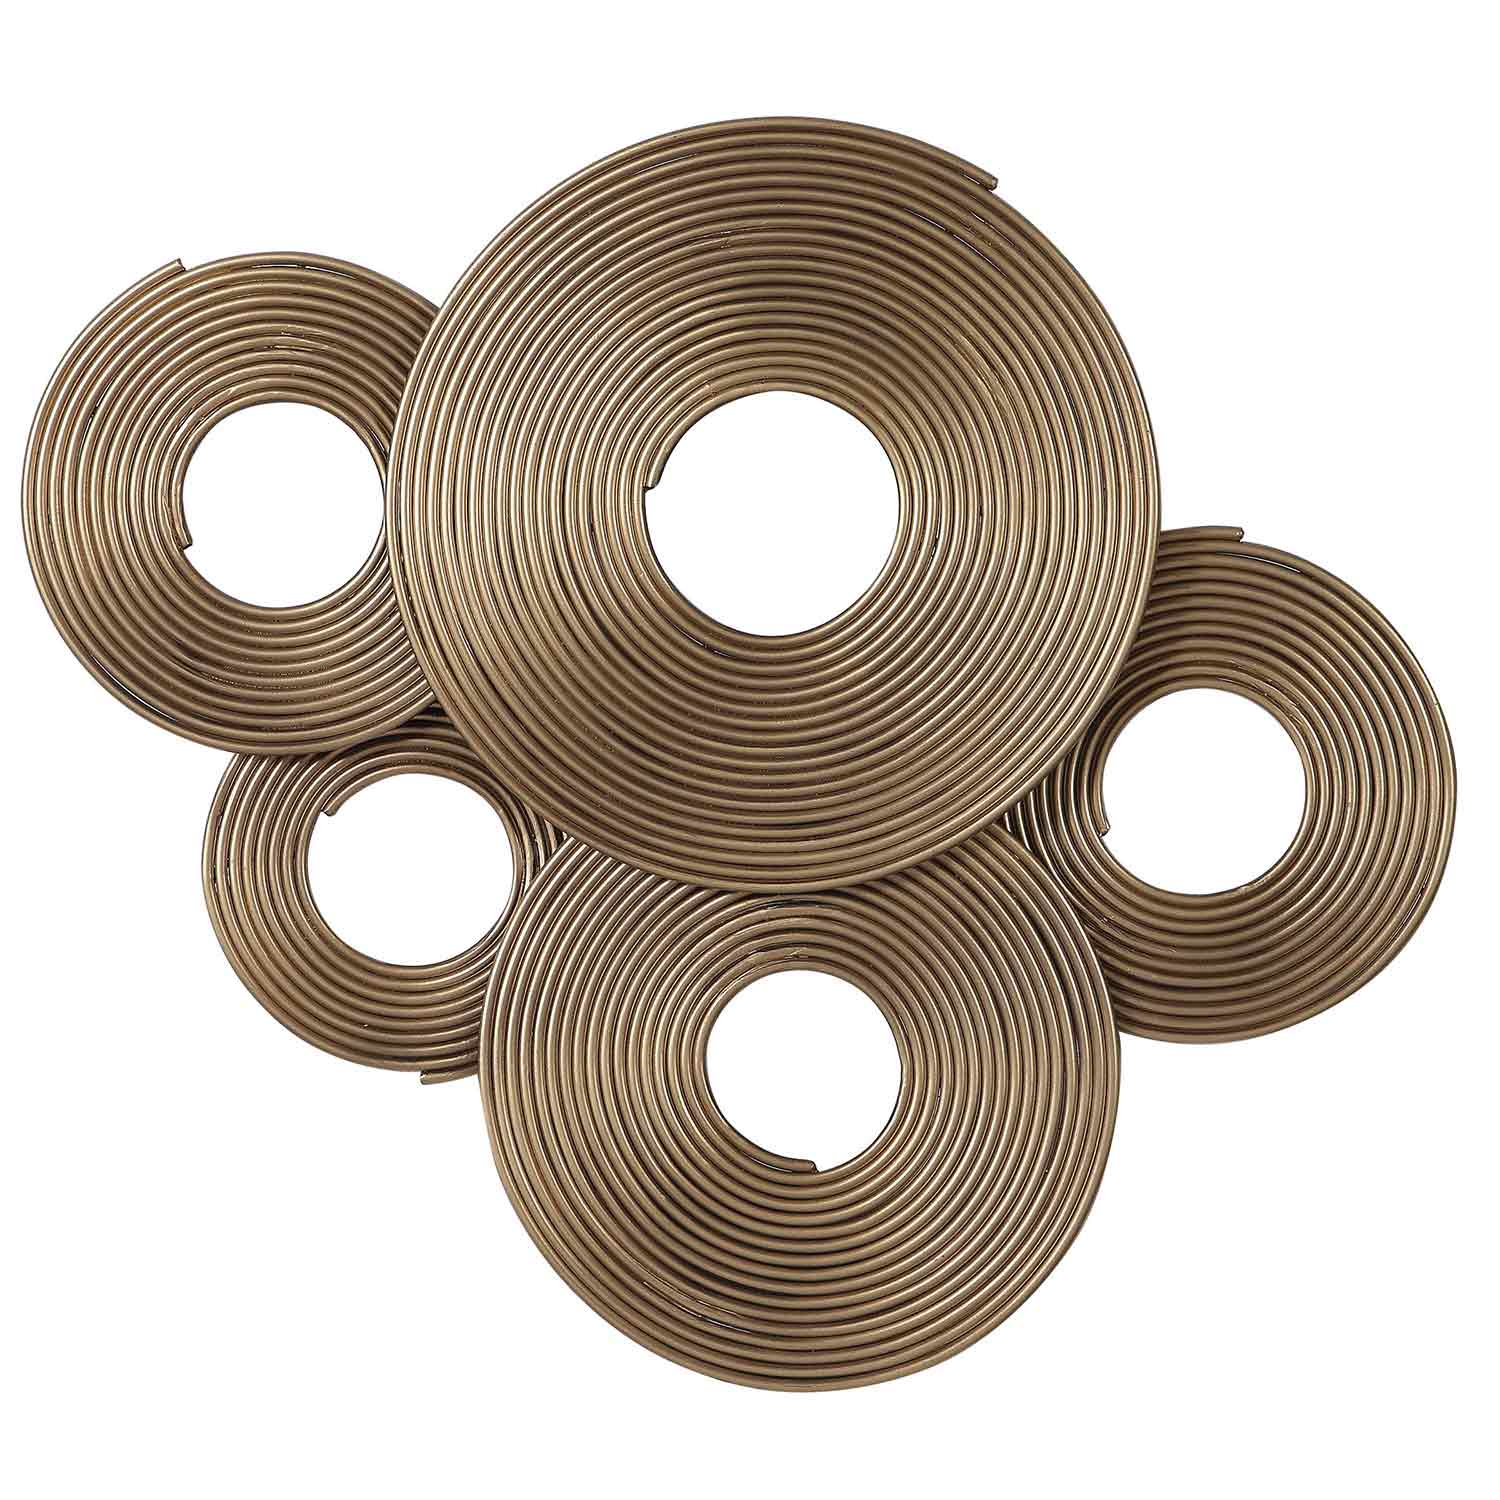 Uttermost Ahmet Rings Wall Decor - Gold